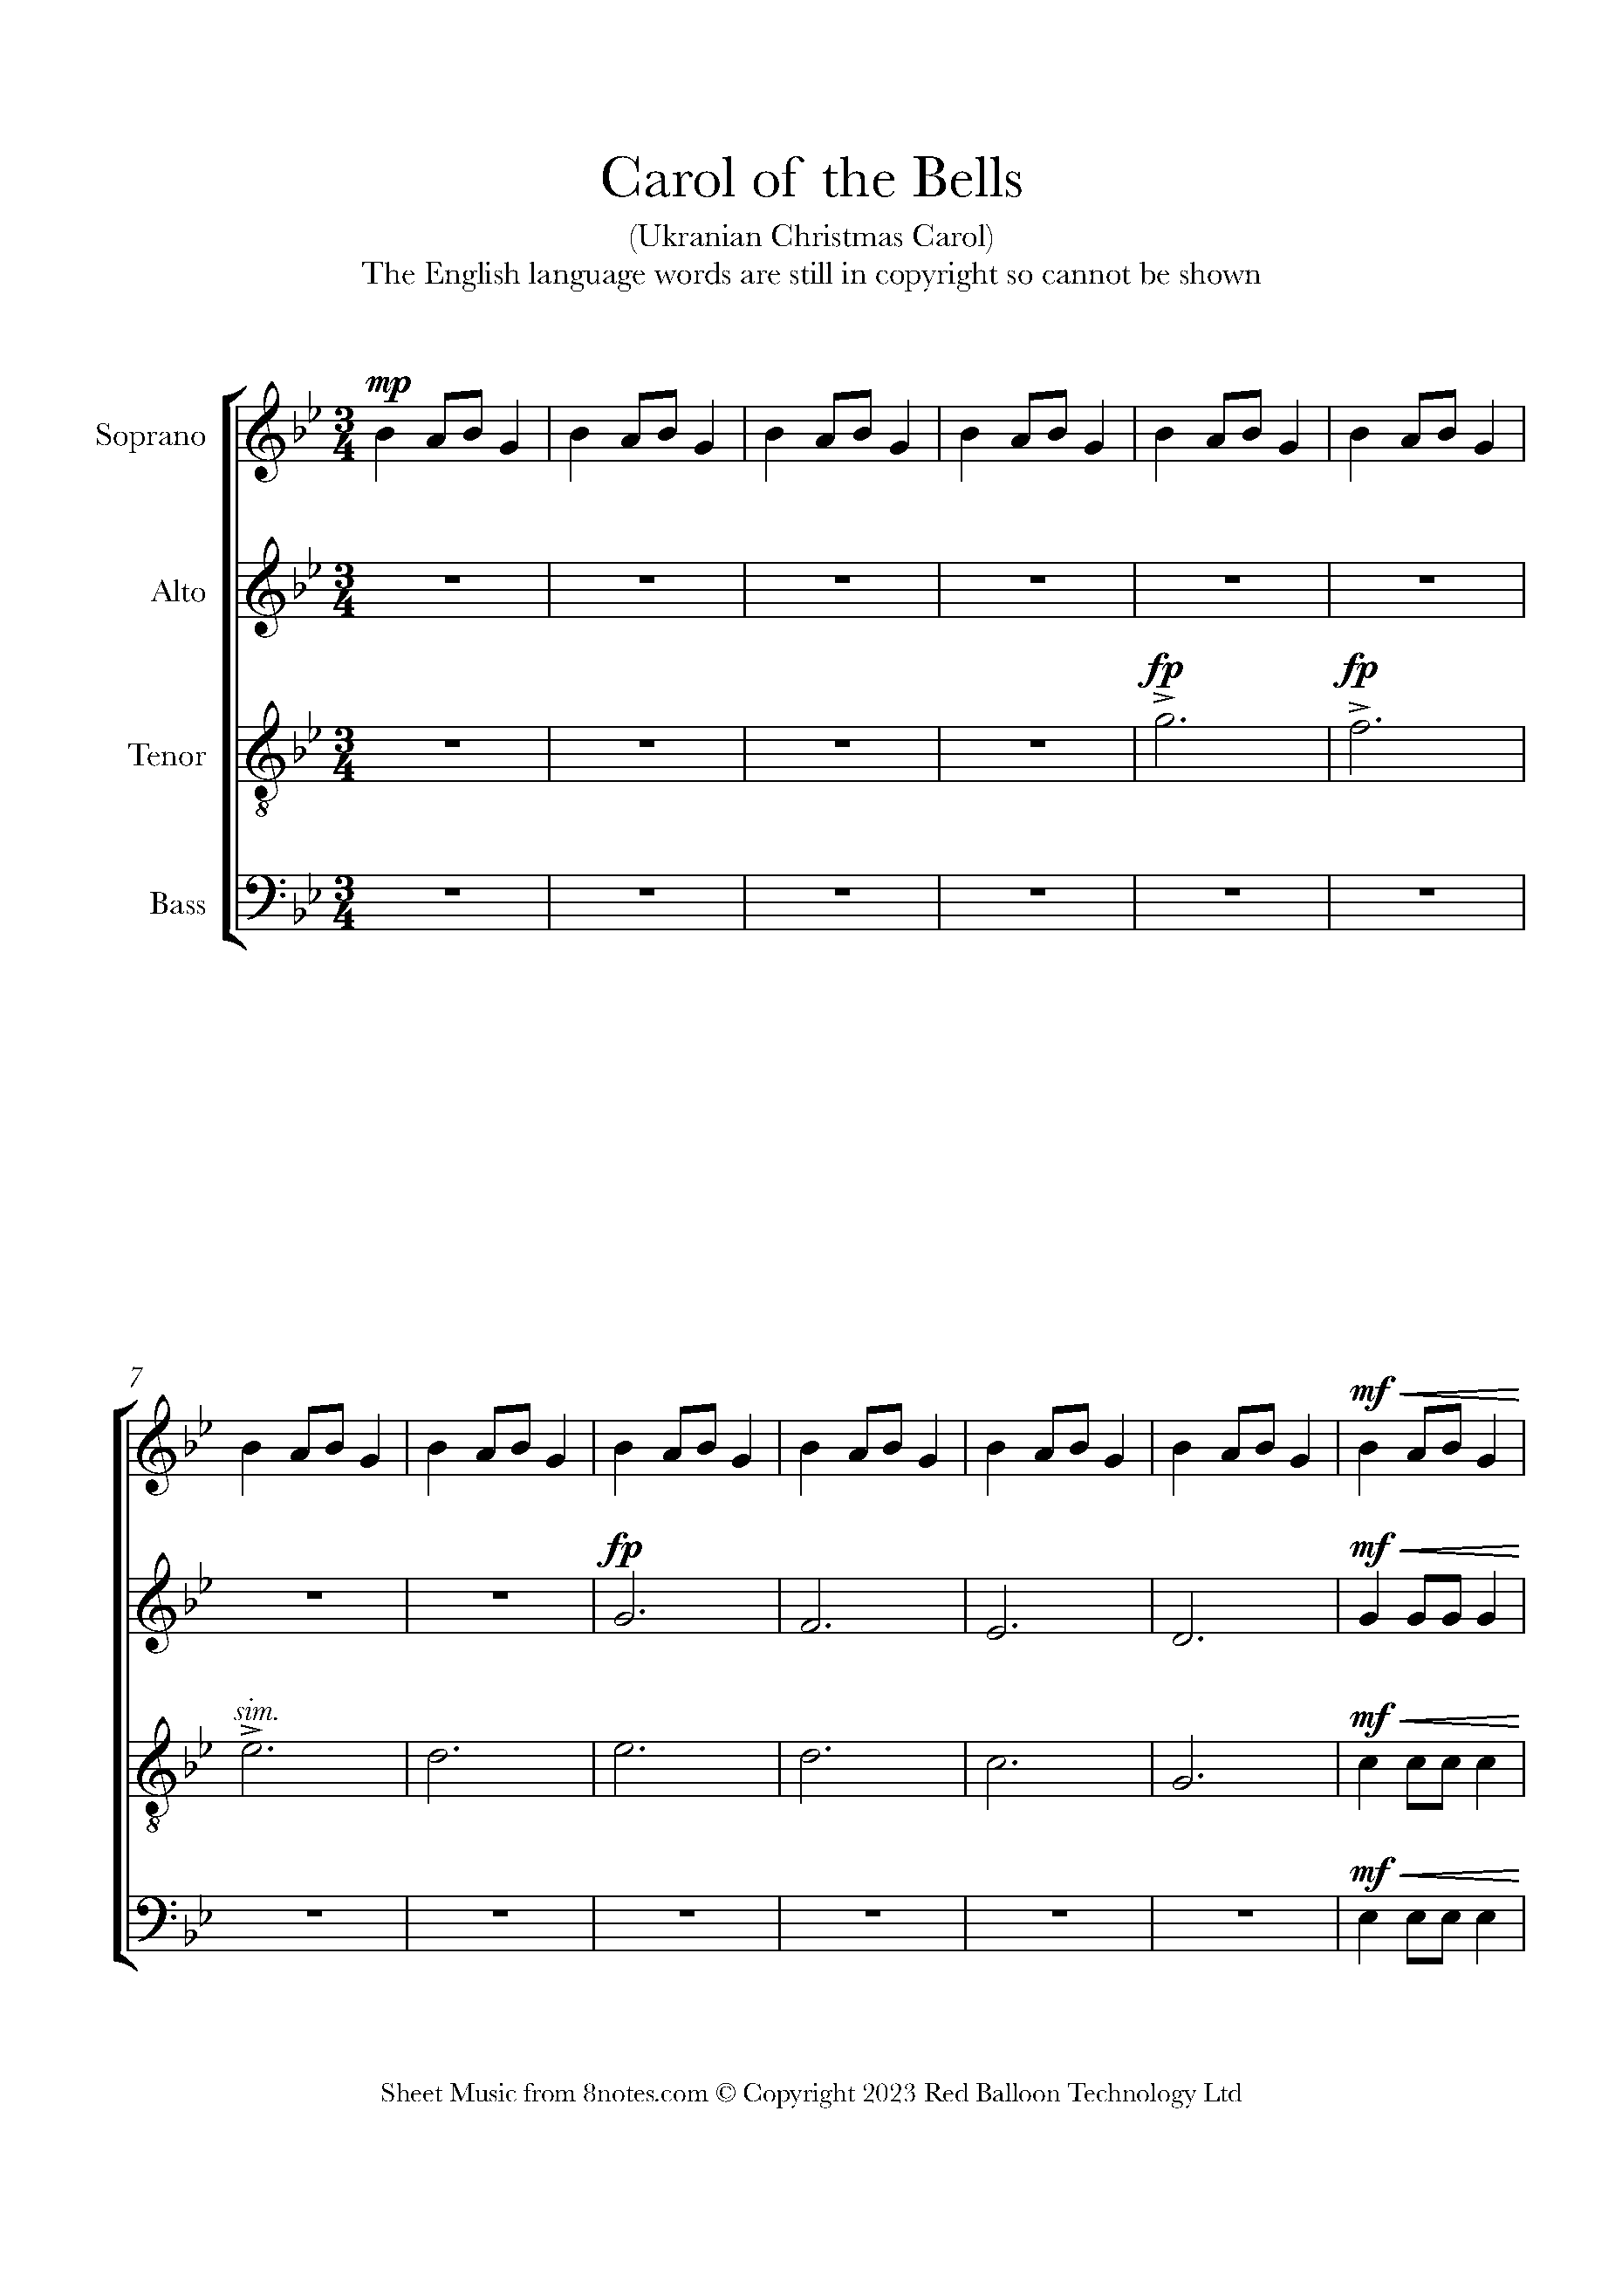 carol-of-the-bells-sheet-music-for-choir-8notes